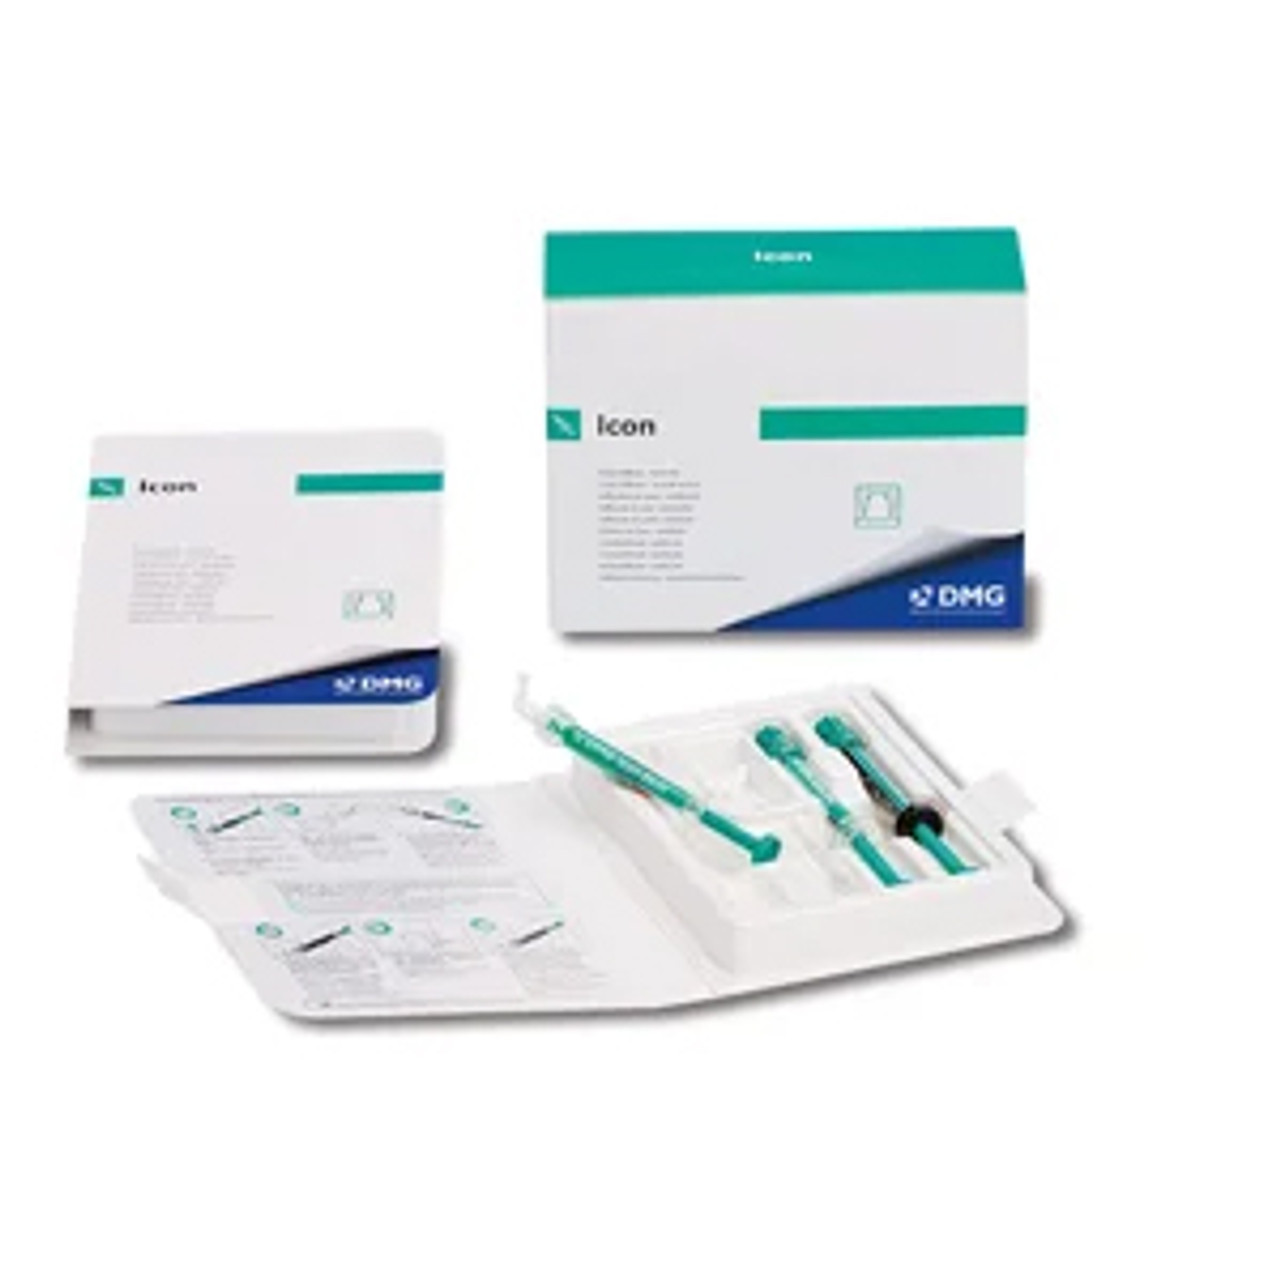 DMG Icon Smooth Surface Mini Kit. Patient Pack Includes: (1) 0.45mL Syringe Icon Etch, (1) 0.45mL Syringe Icon Dry, (1) 0.45mL Syringe Icon Infiltrant, (6) Smooth Surface Tips, (1) Luer-Lock Tip. 2 Patient Packs/kit